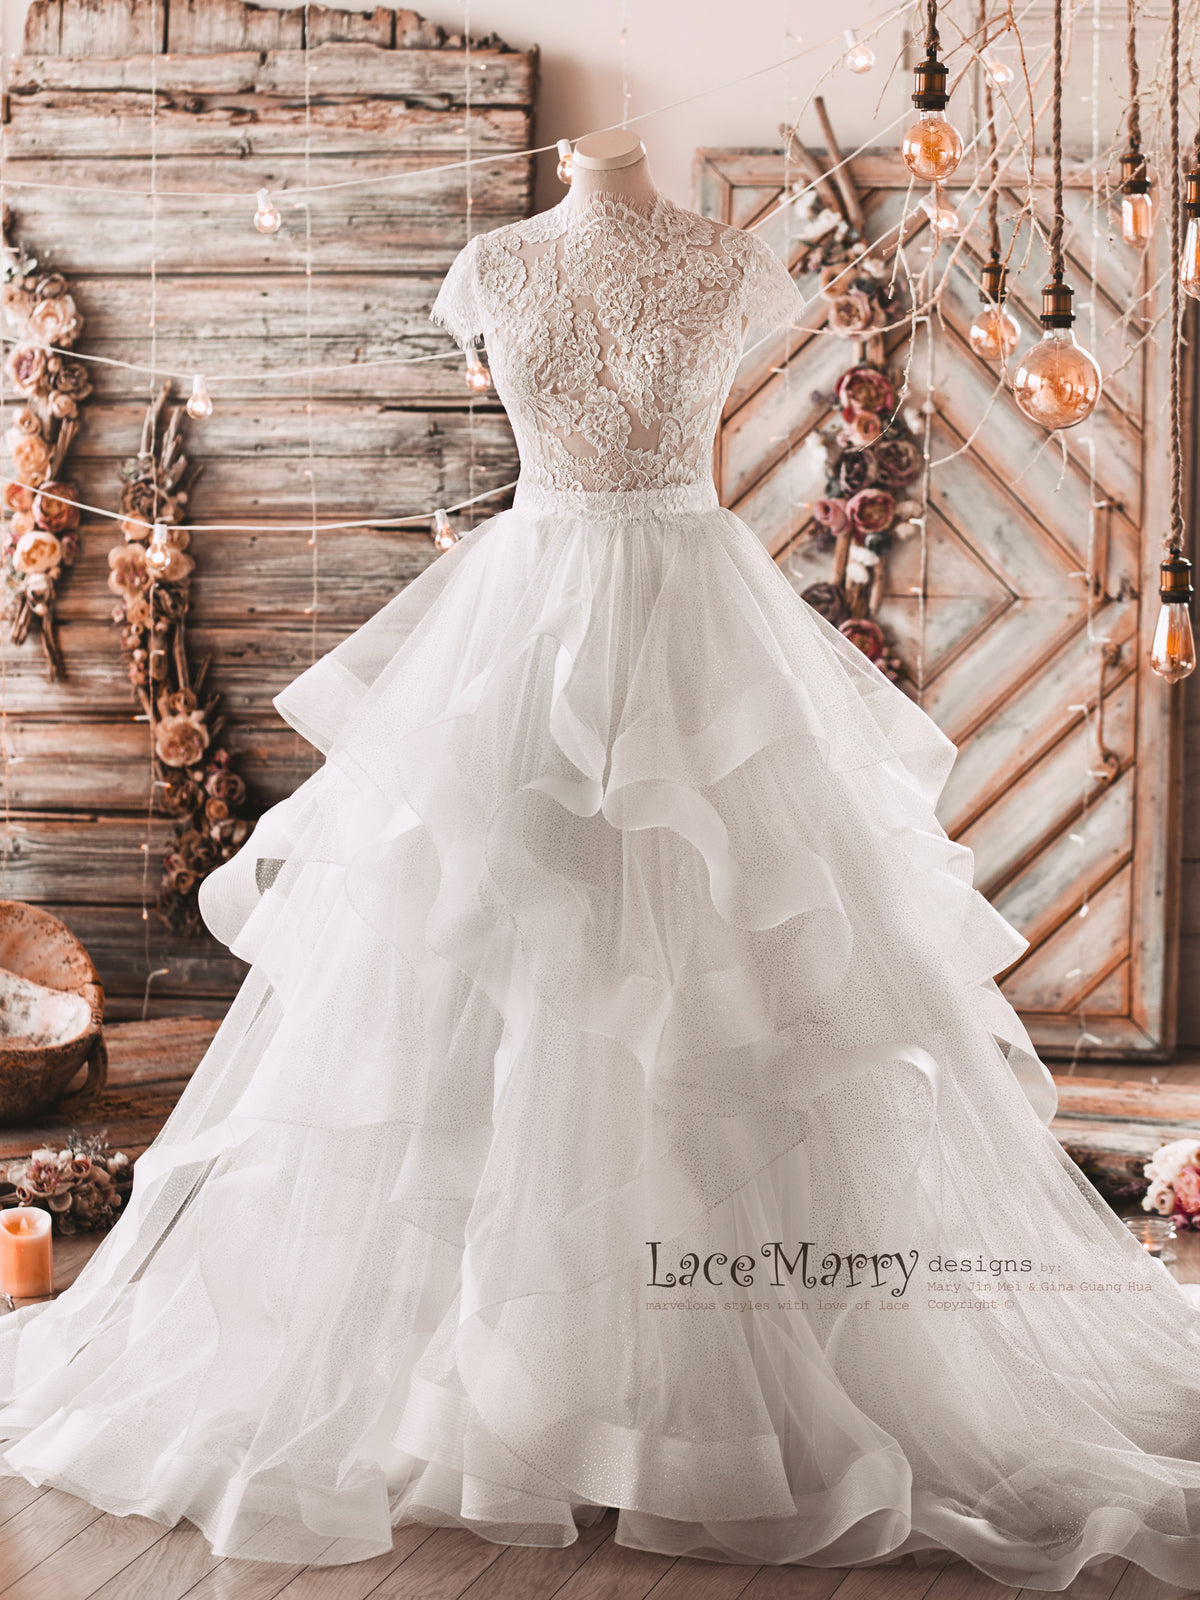 Wedding Dress with Multi Layer A Line Skirt and Lace Top - LaceMarry